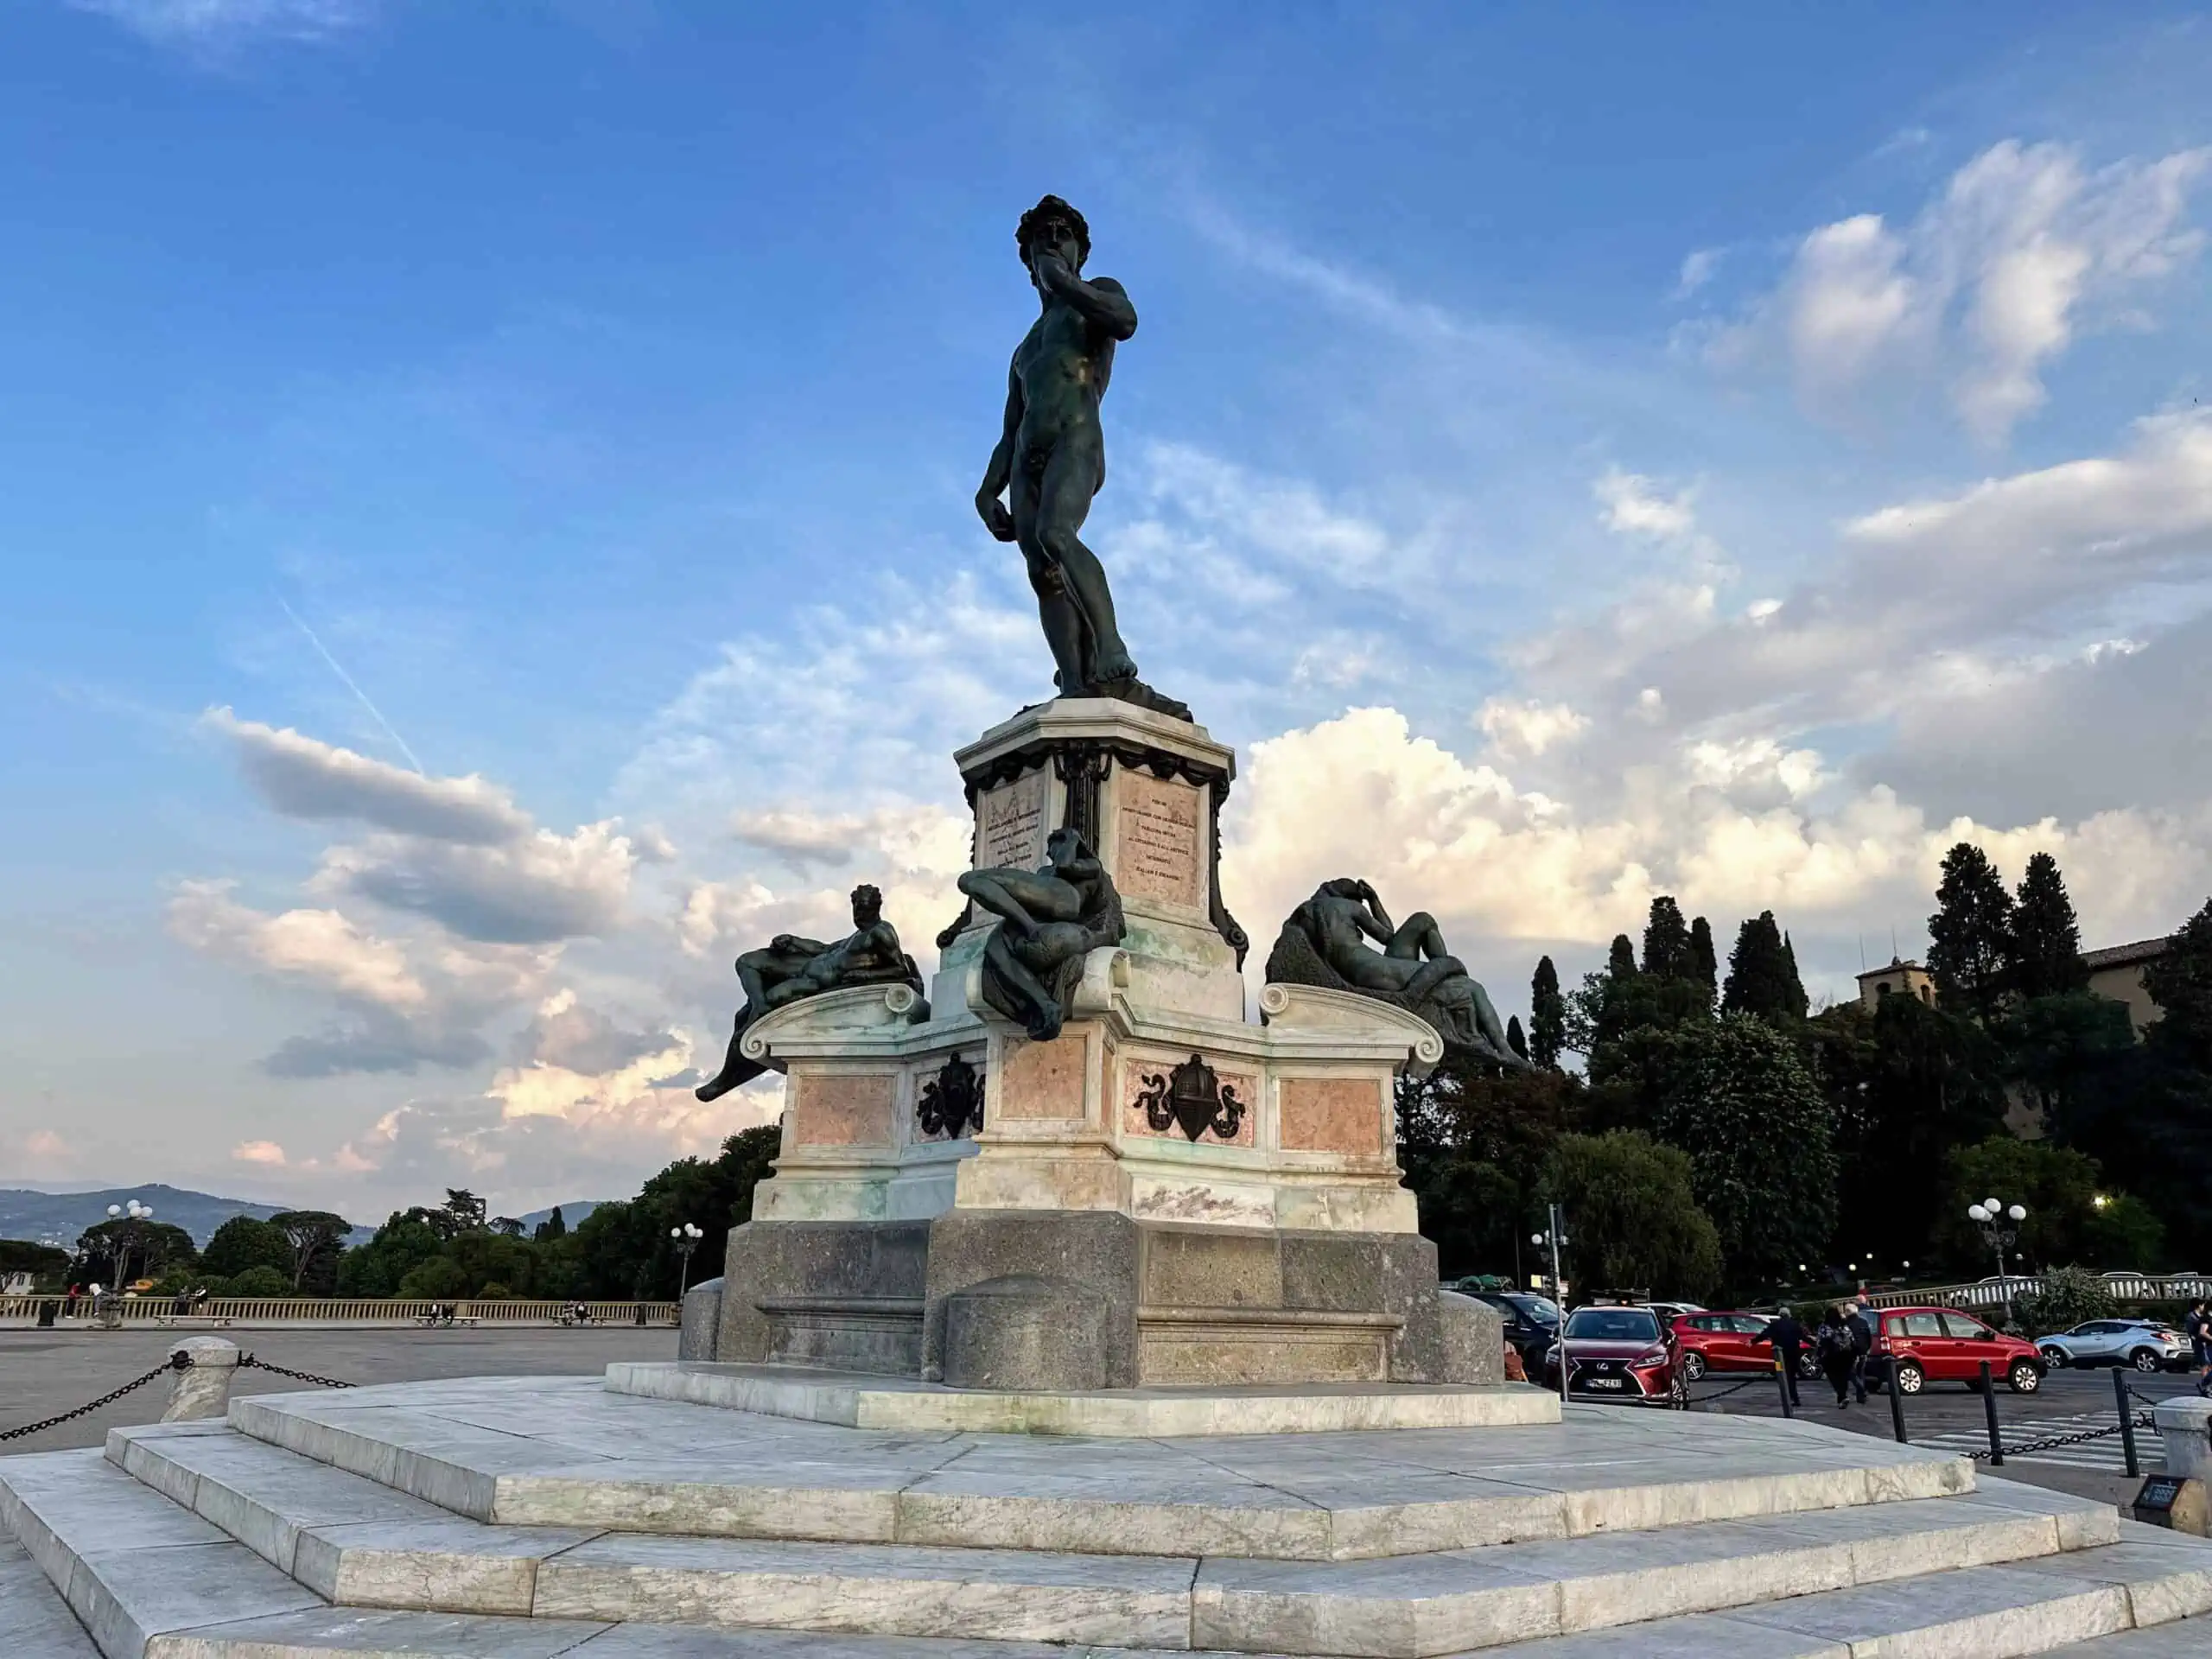 View of Michelangelo statue in Piazzale Michelangelo in Florence. It's a sunny day. You can see cars parked in the piazzale in the background on the right.